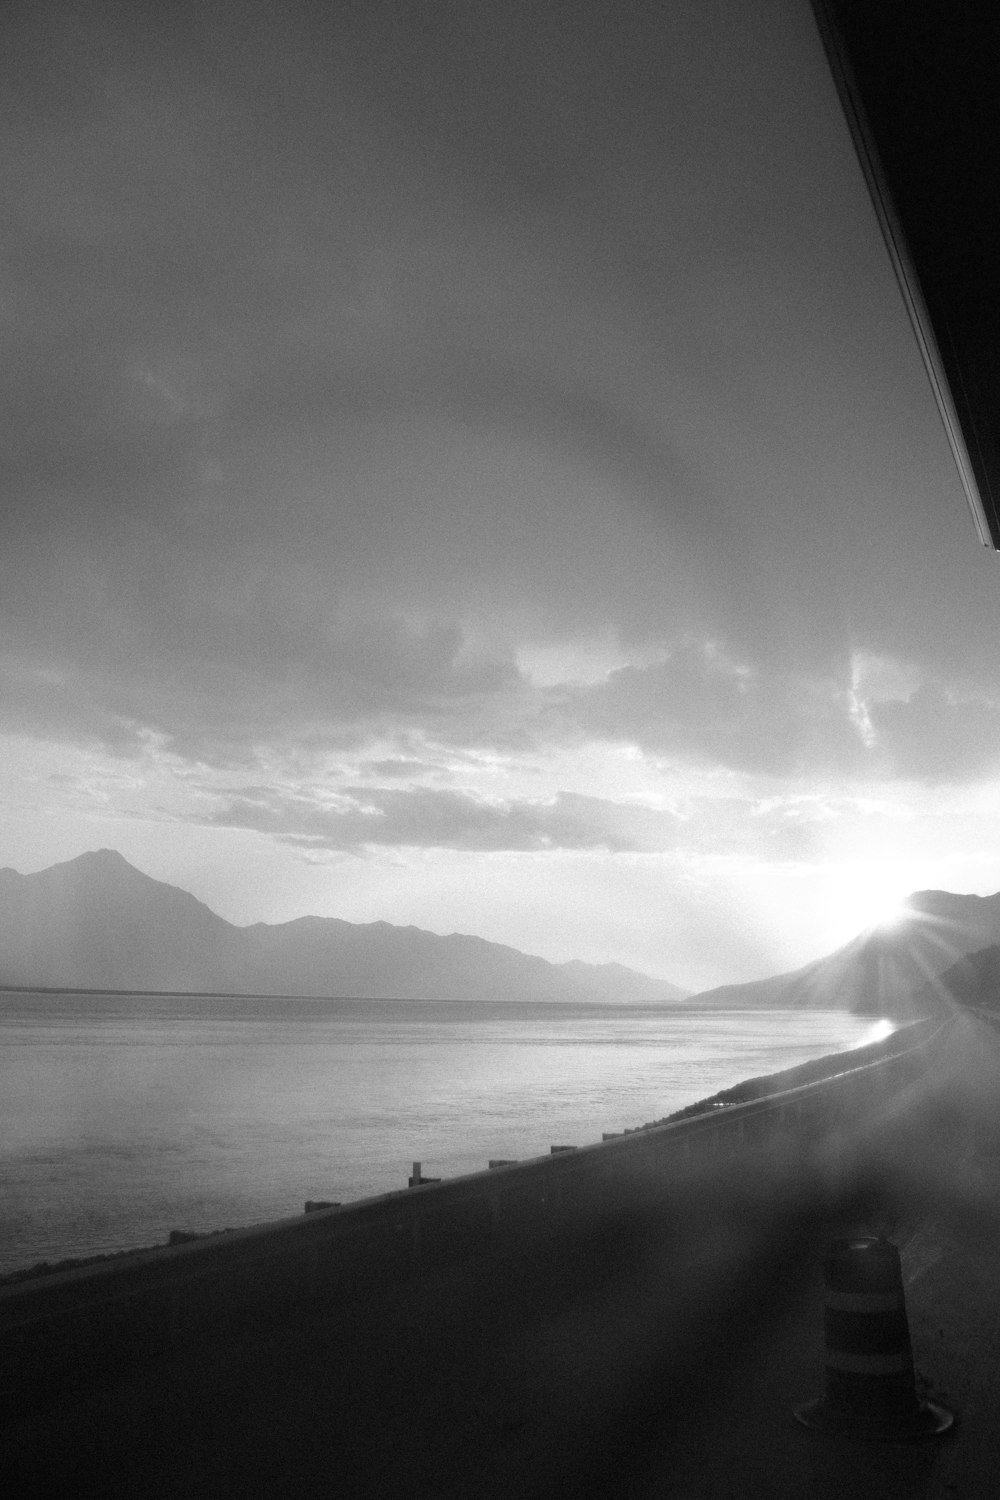 grayscale photo of mountains near body of water